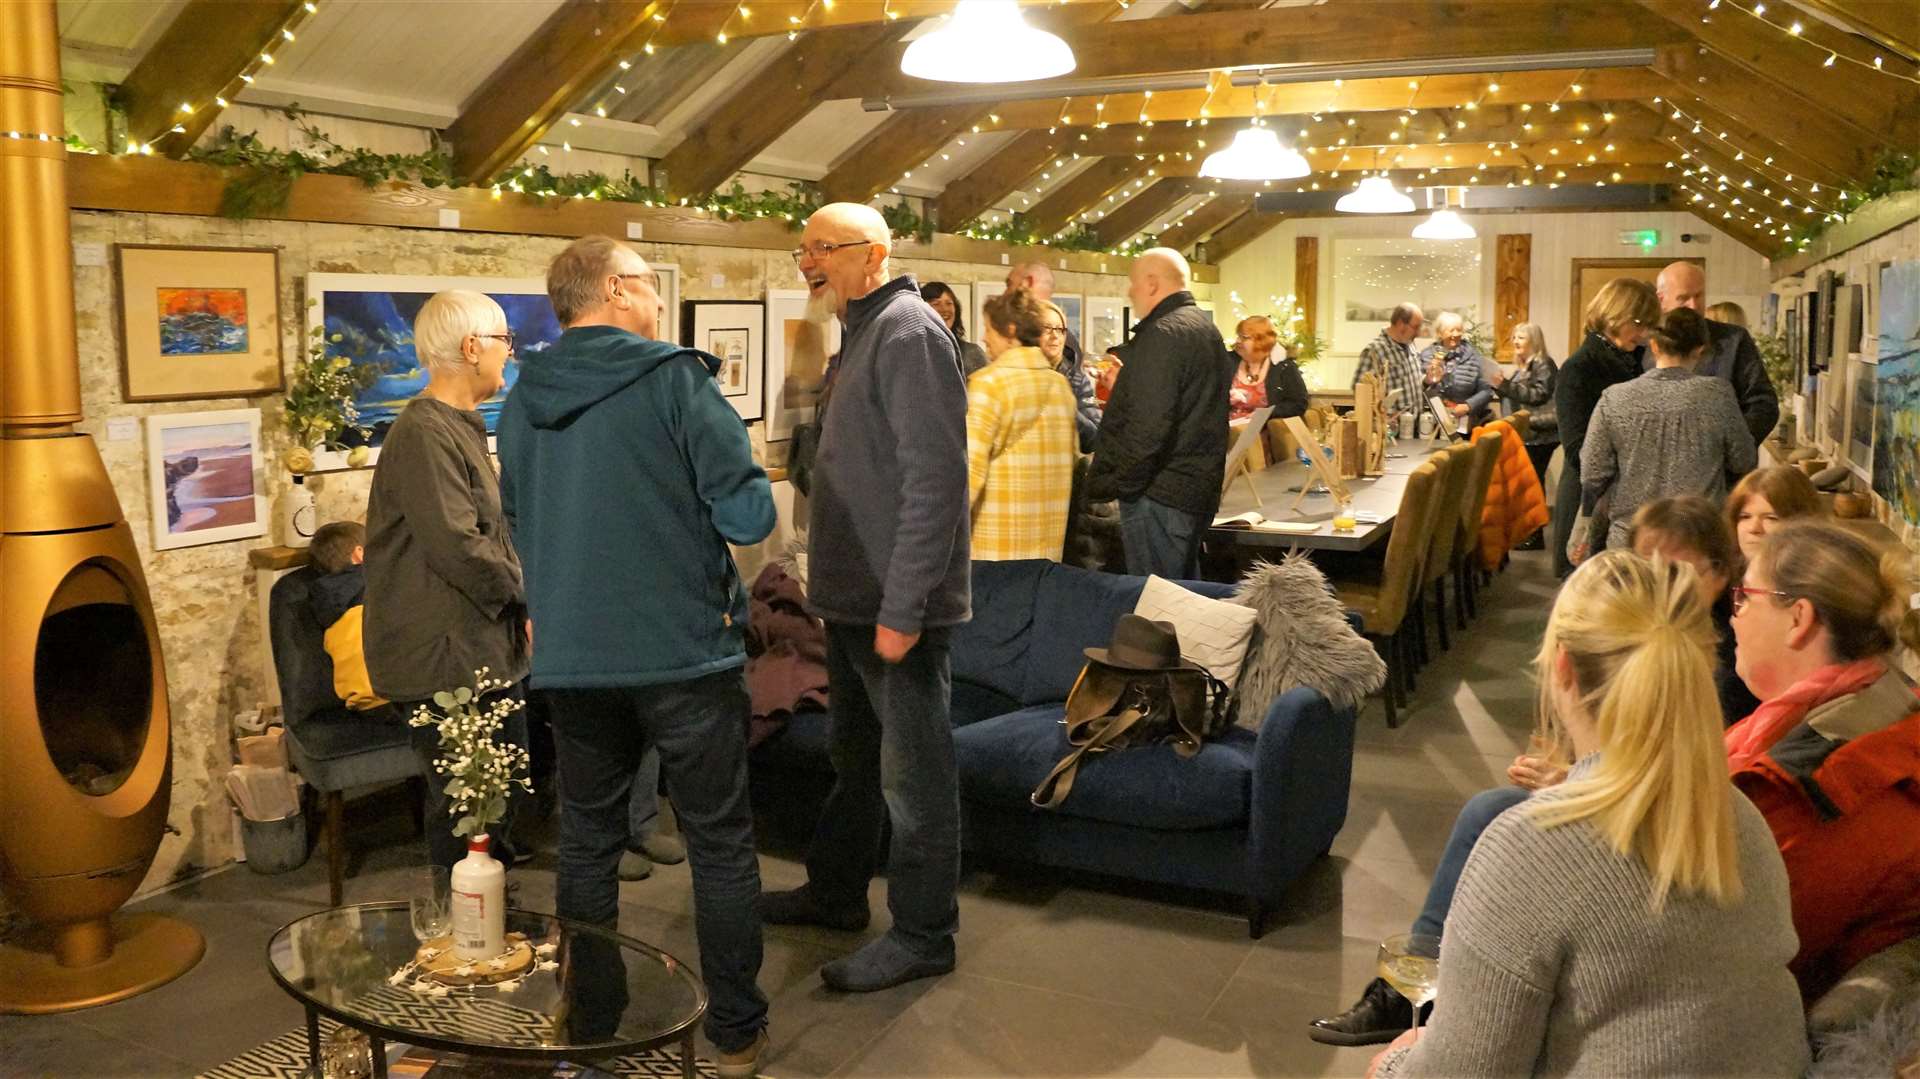 Dunnet Bay Distillery was filled with artists along with friends, relatives and connoisseurs. Pictures: DGS